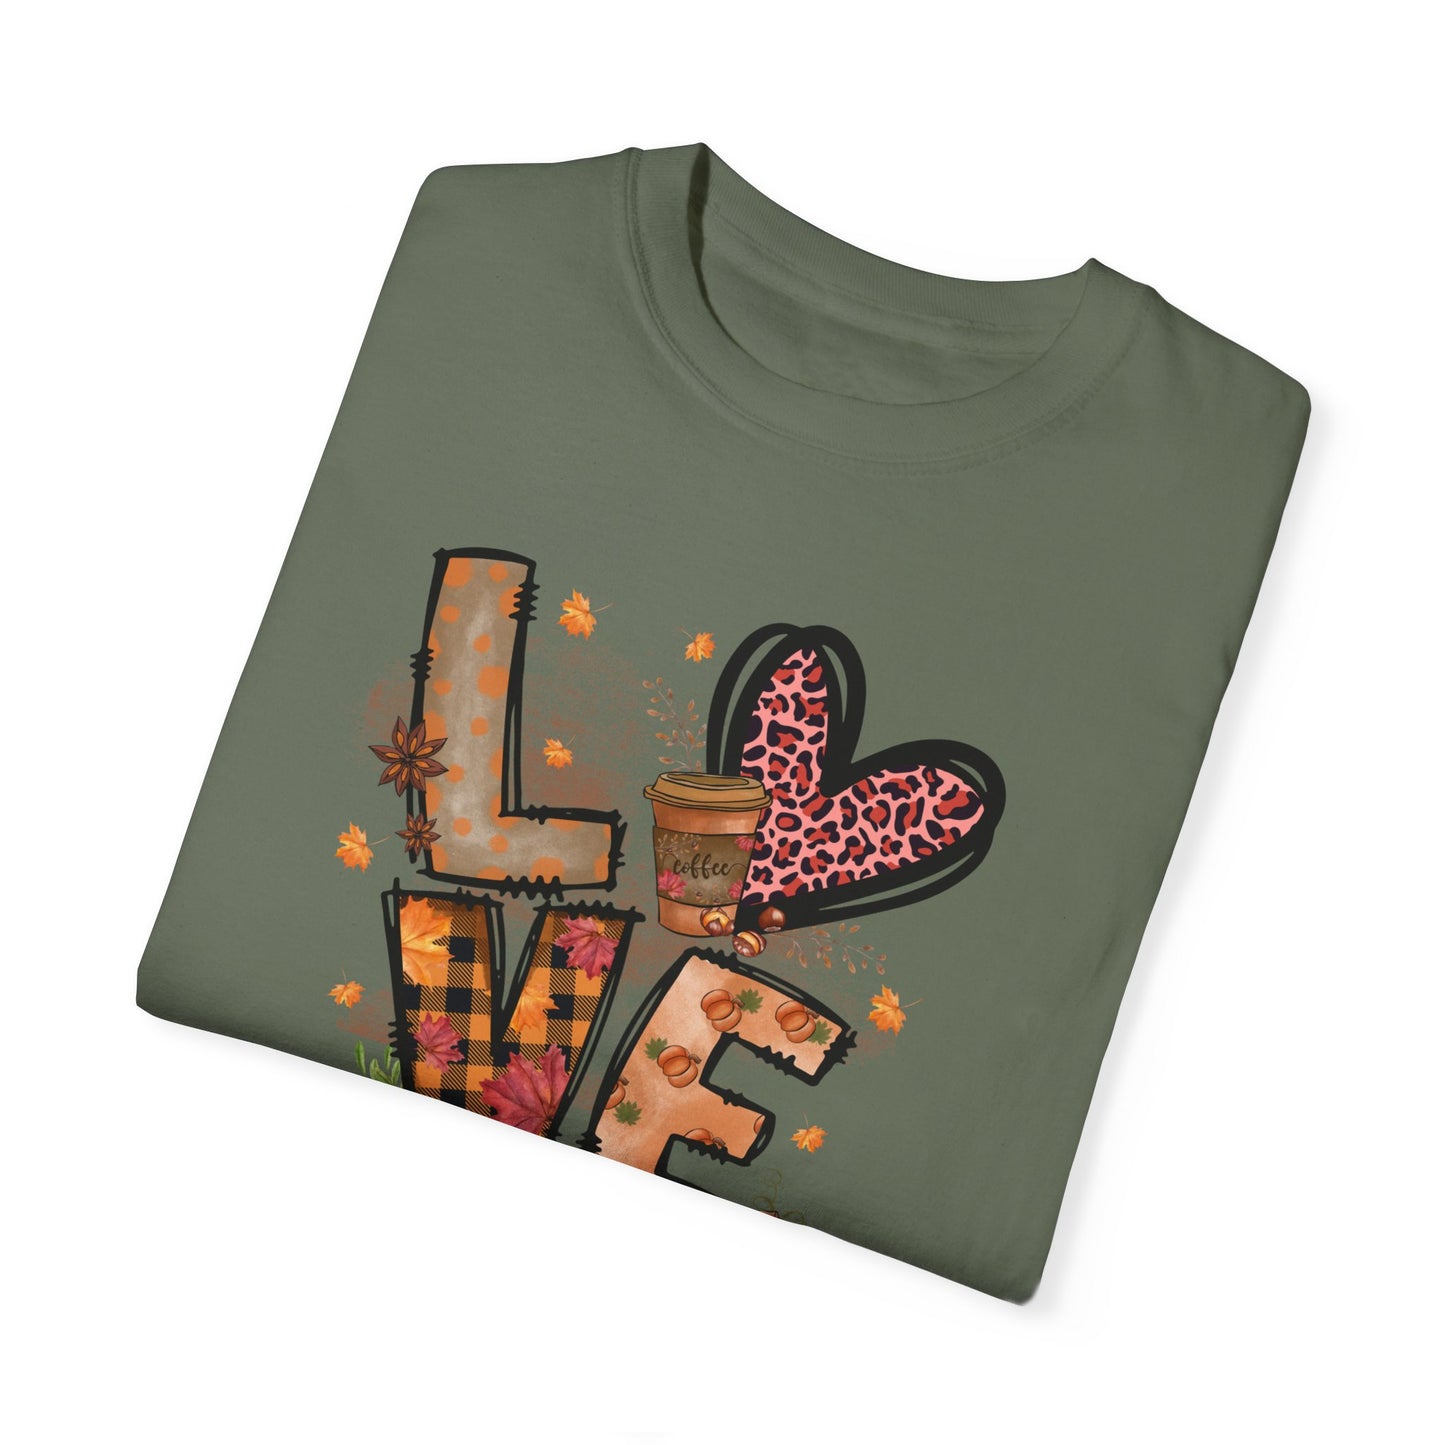 LOVE Fall Yall T-Shirt With Leaves and Pumpkin